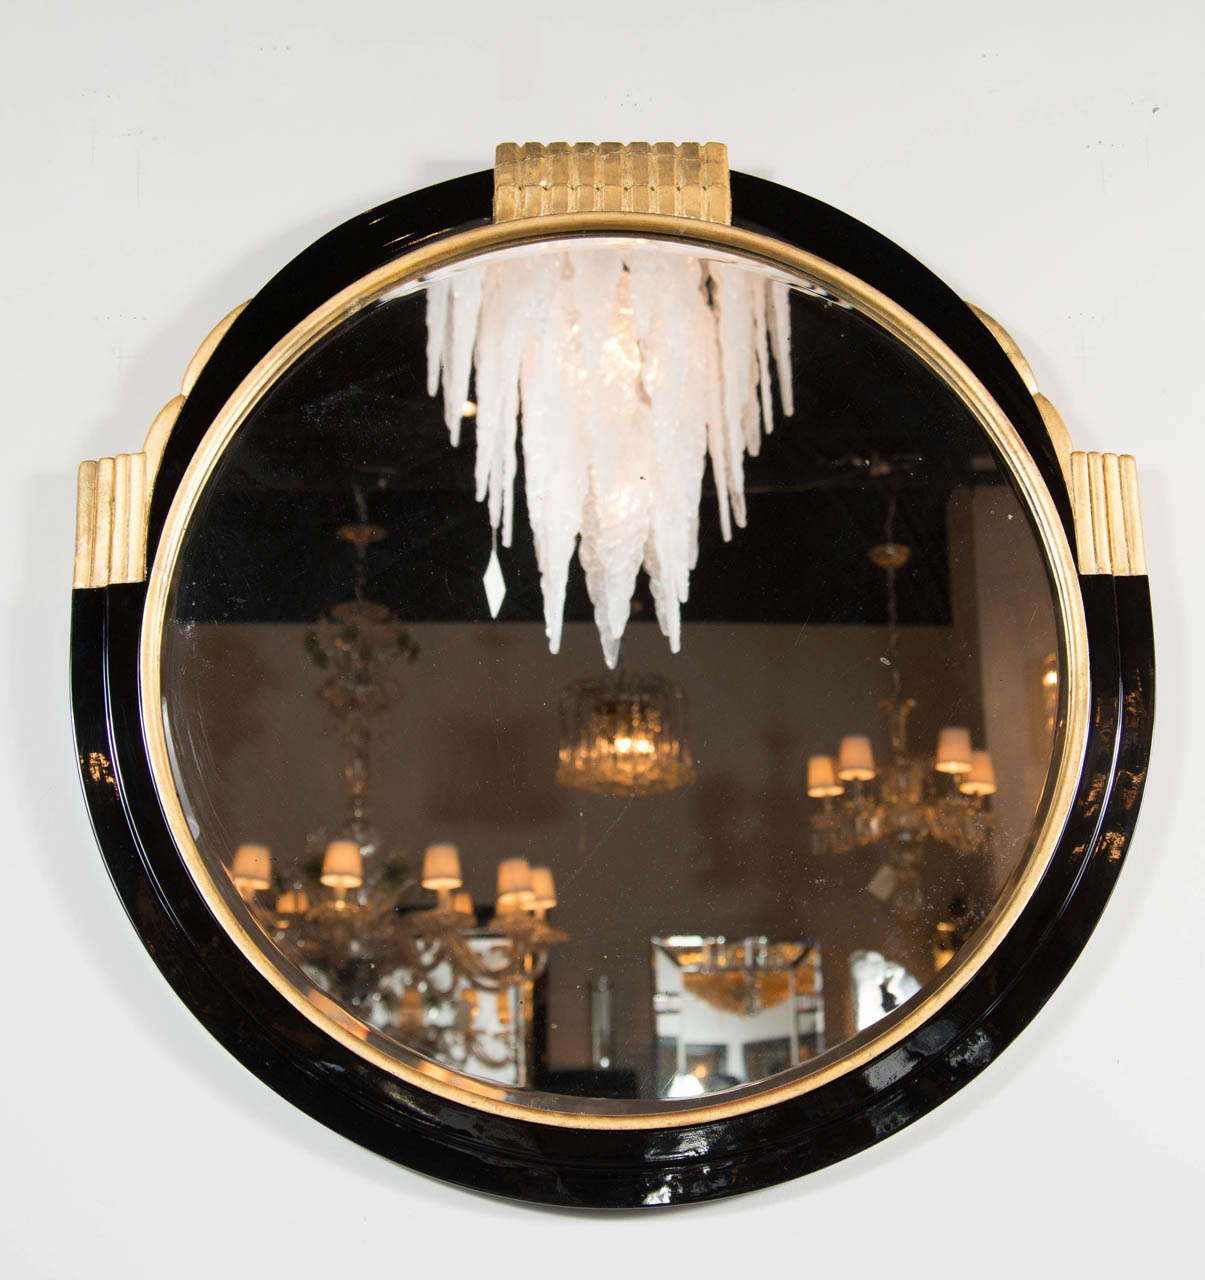 This gorgeous mirror is made of ebonized walnut with 24 gilt fluted detailing and accents.The mirror also features a hand beveled border detailing surround.